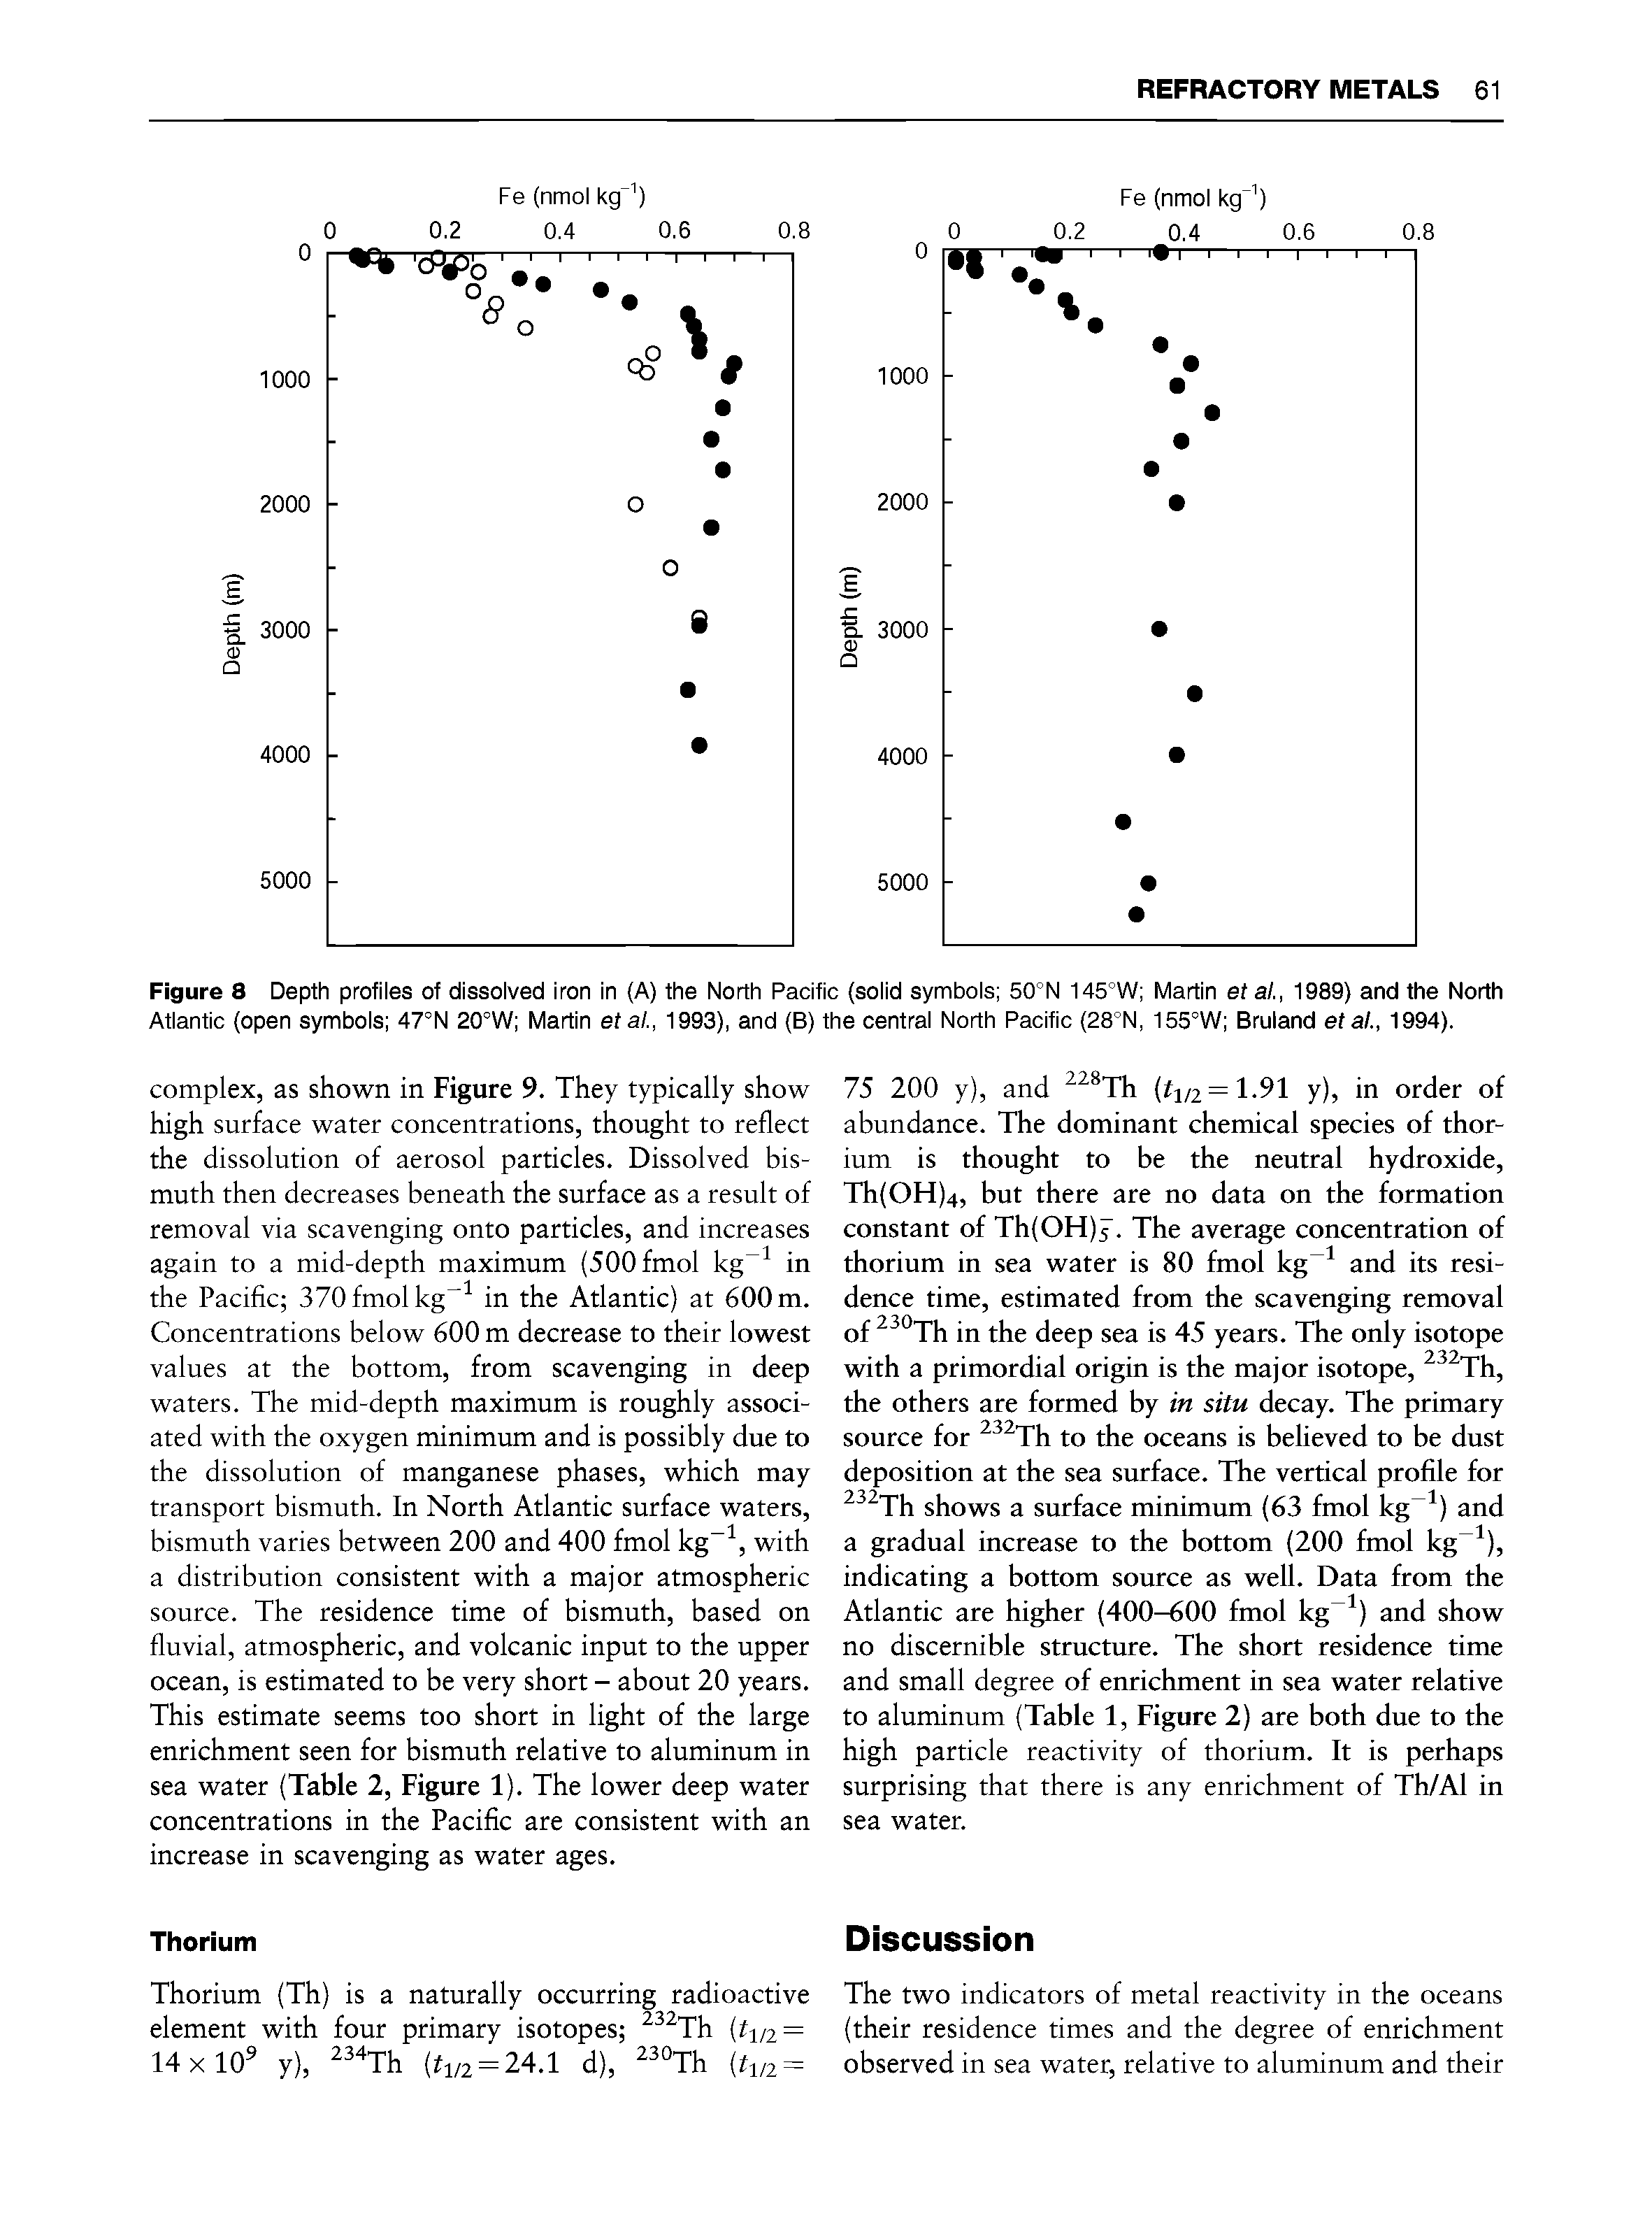 Figure 8 Depth profiles of dissolved Iron In (A) the North Pacific (solid symbols 50°N 145°W Martin et ai, 1989) and the North Atlantic (open symbols 47°N 20°W Martin et al., 1993), and (B) the central North Pacific (28°N, 155°W Bruland eta ., 1994).